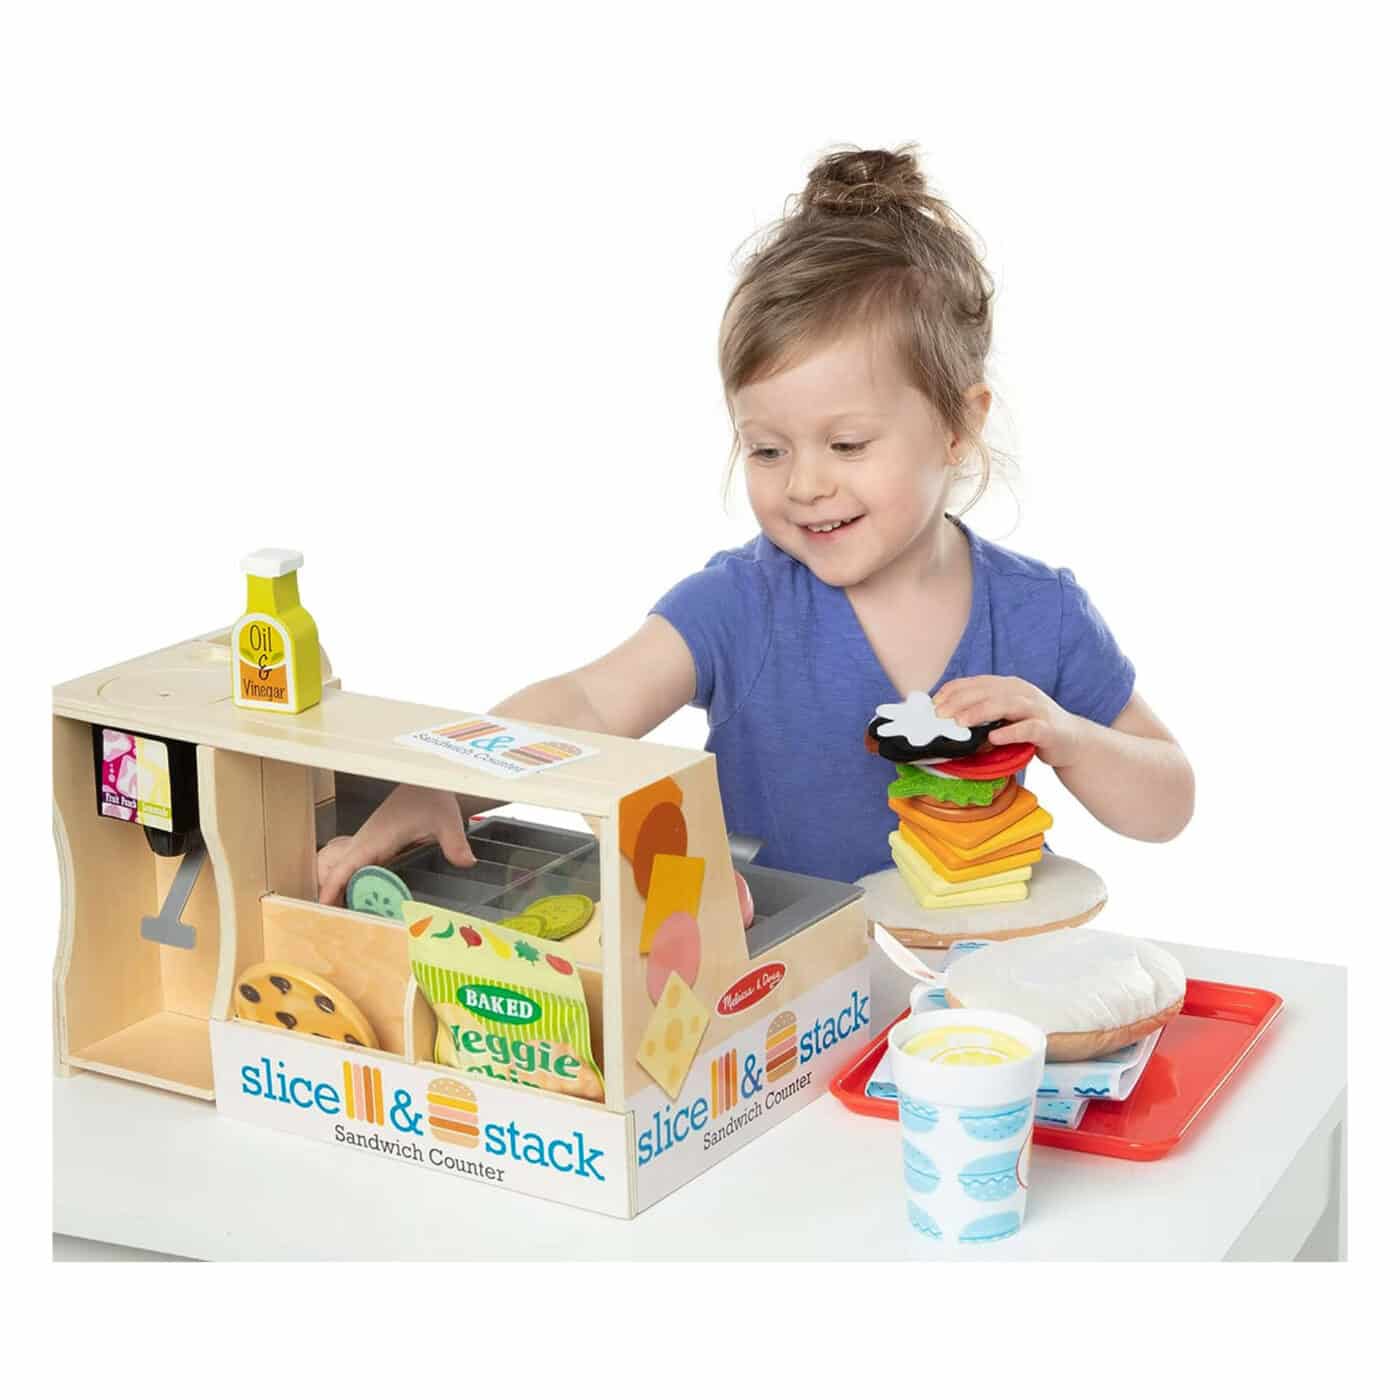 Melissa and Doug - Wooden Slice & Stack Sandwich Counter3